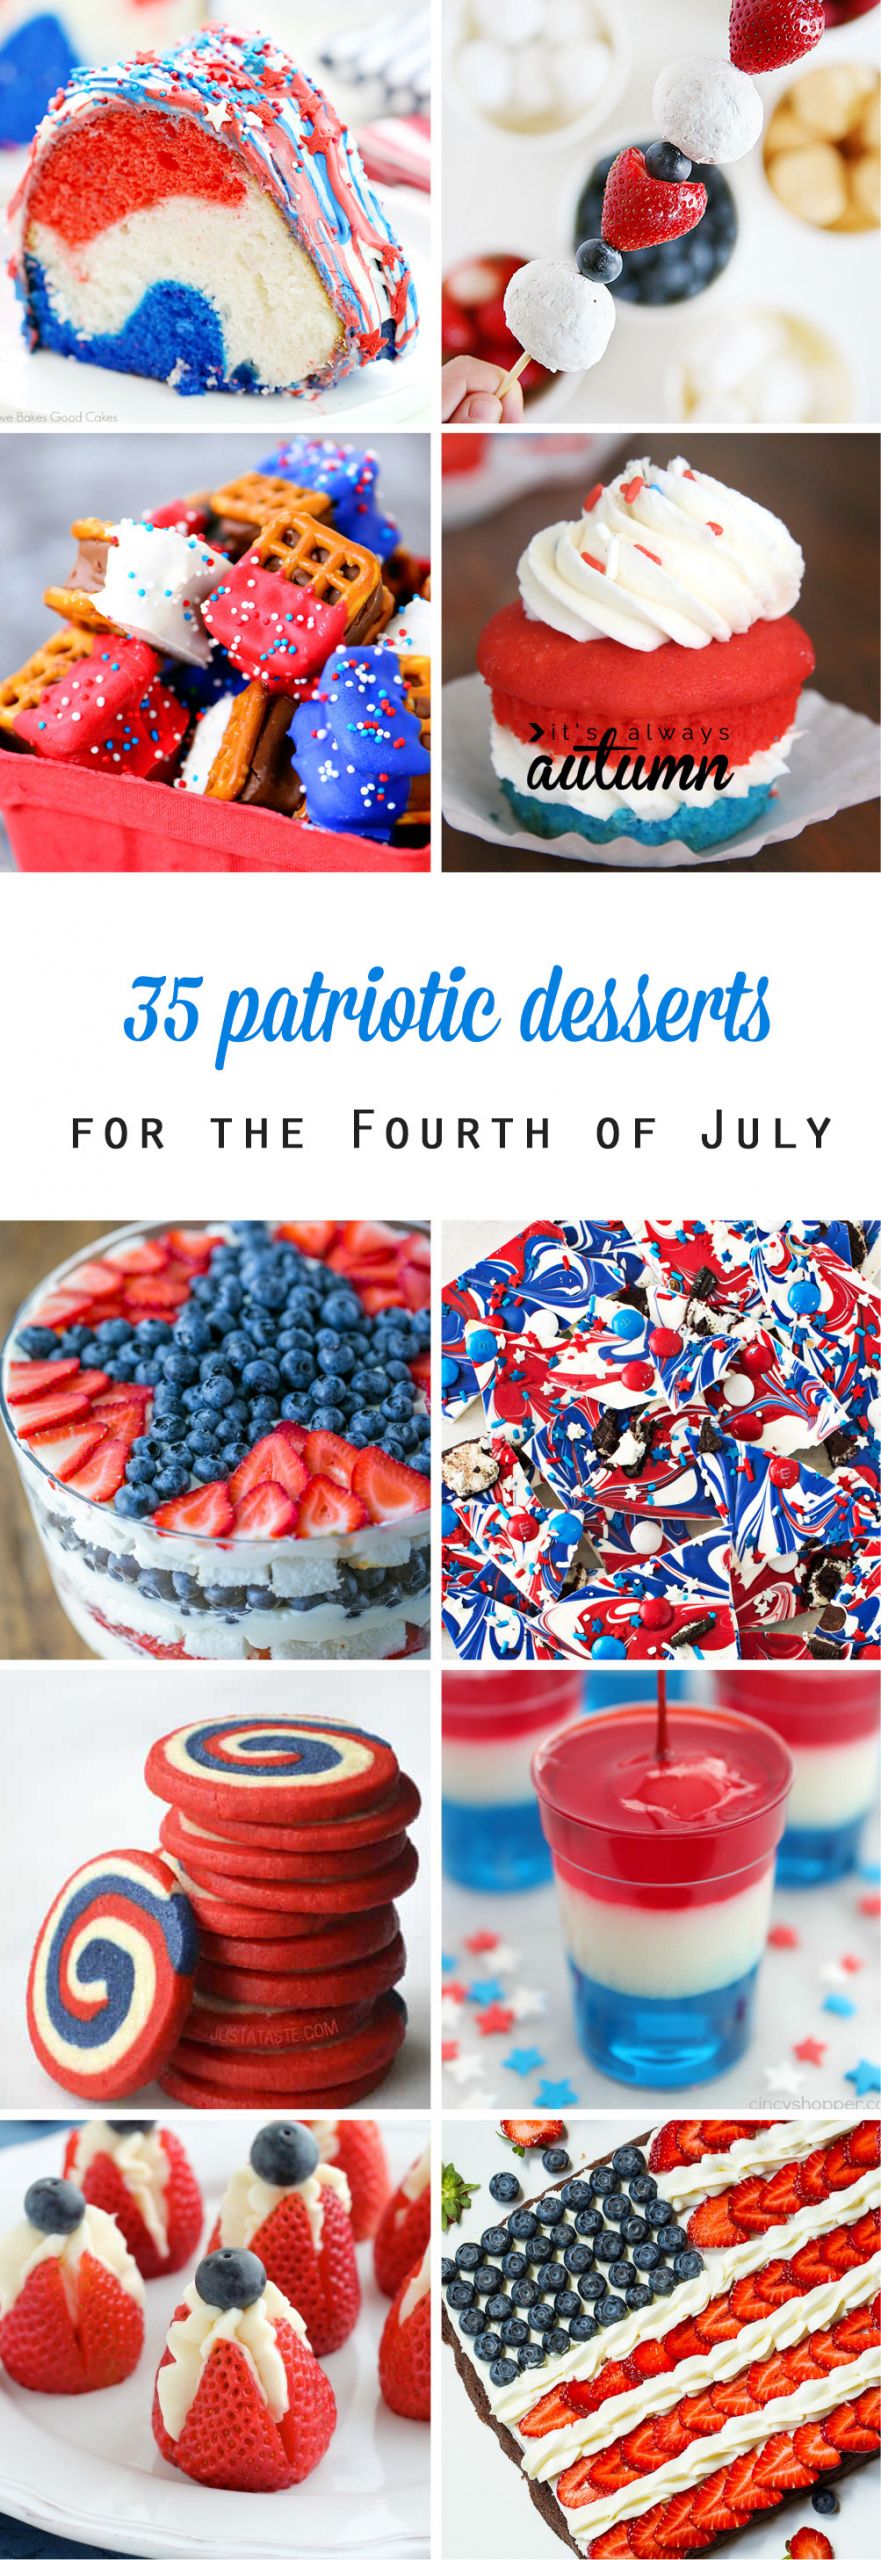 Easy July 4 Desserts
 20 red white and blue desserts for the Fourth of July